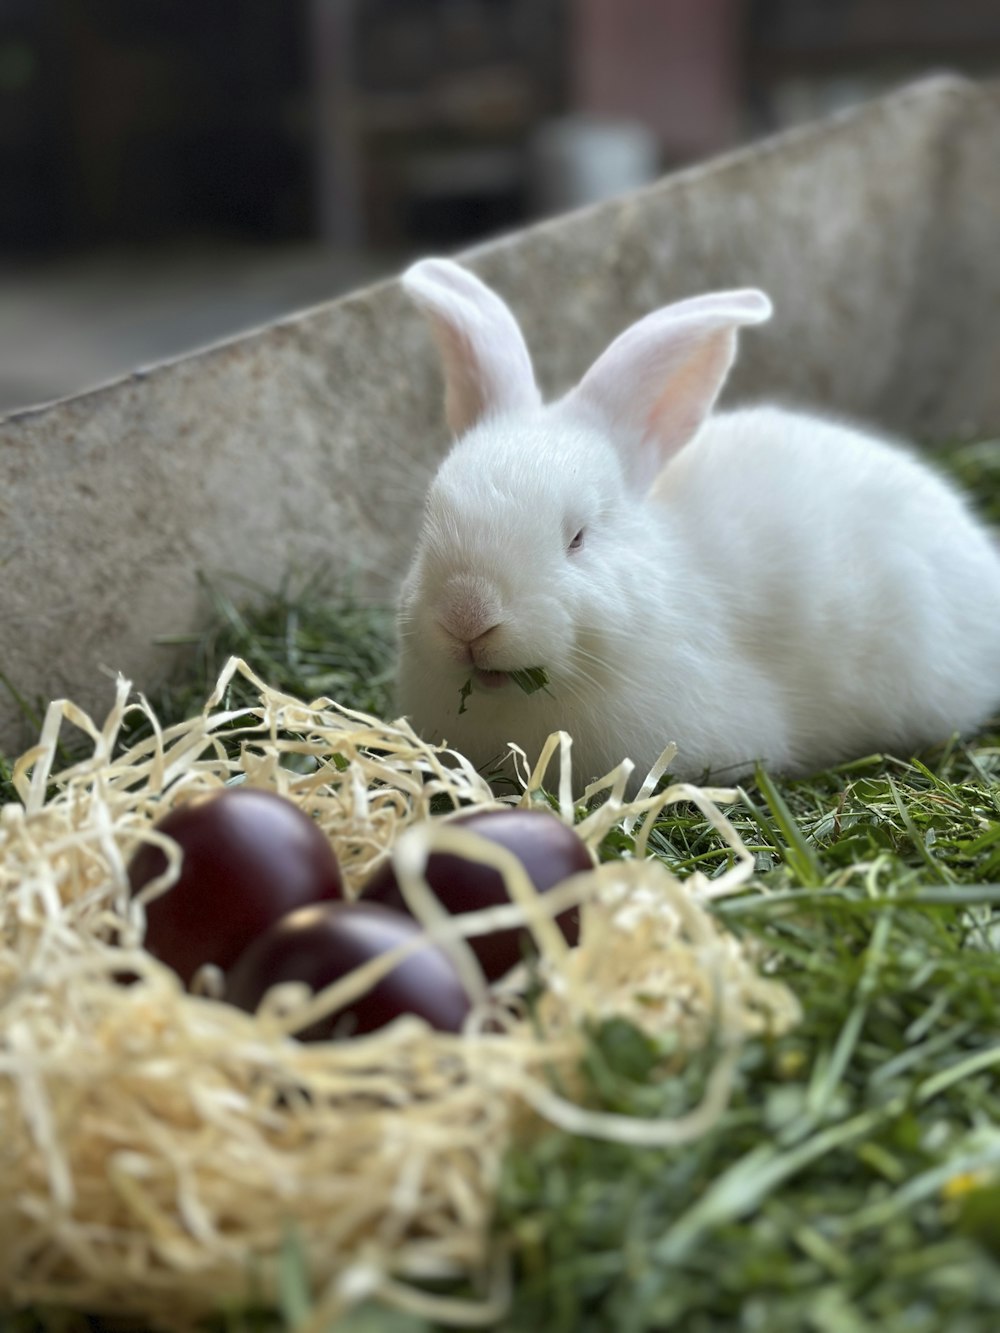 a white rabbit is sitting in the grass next to some eggs